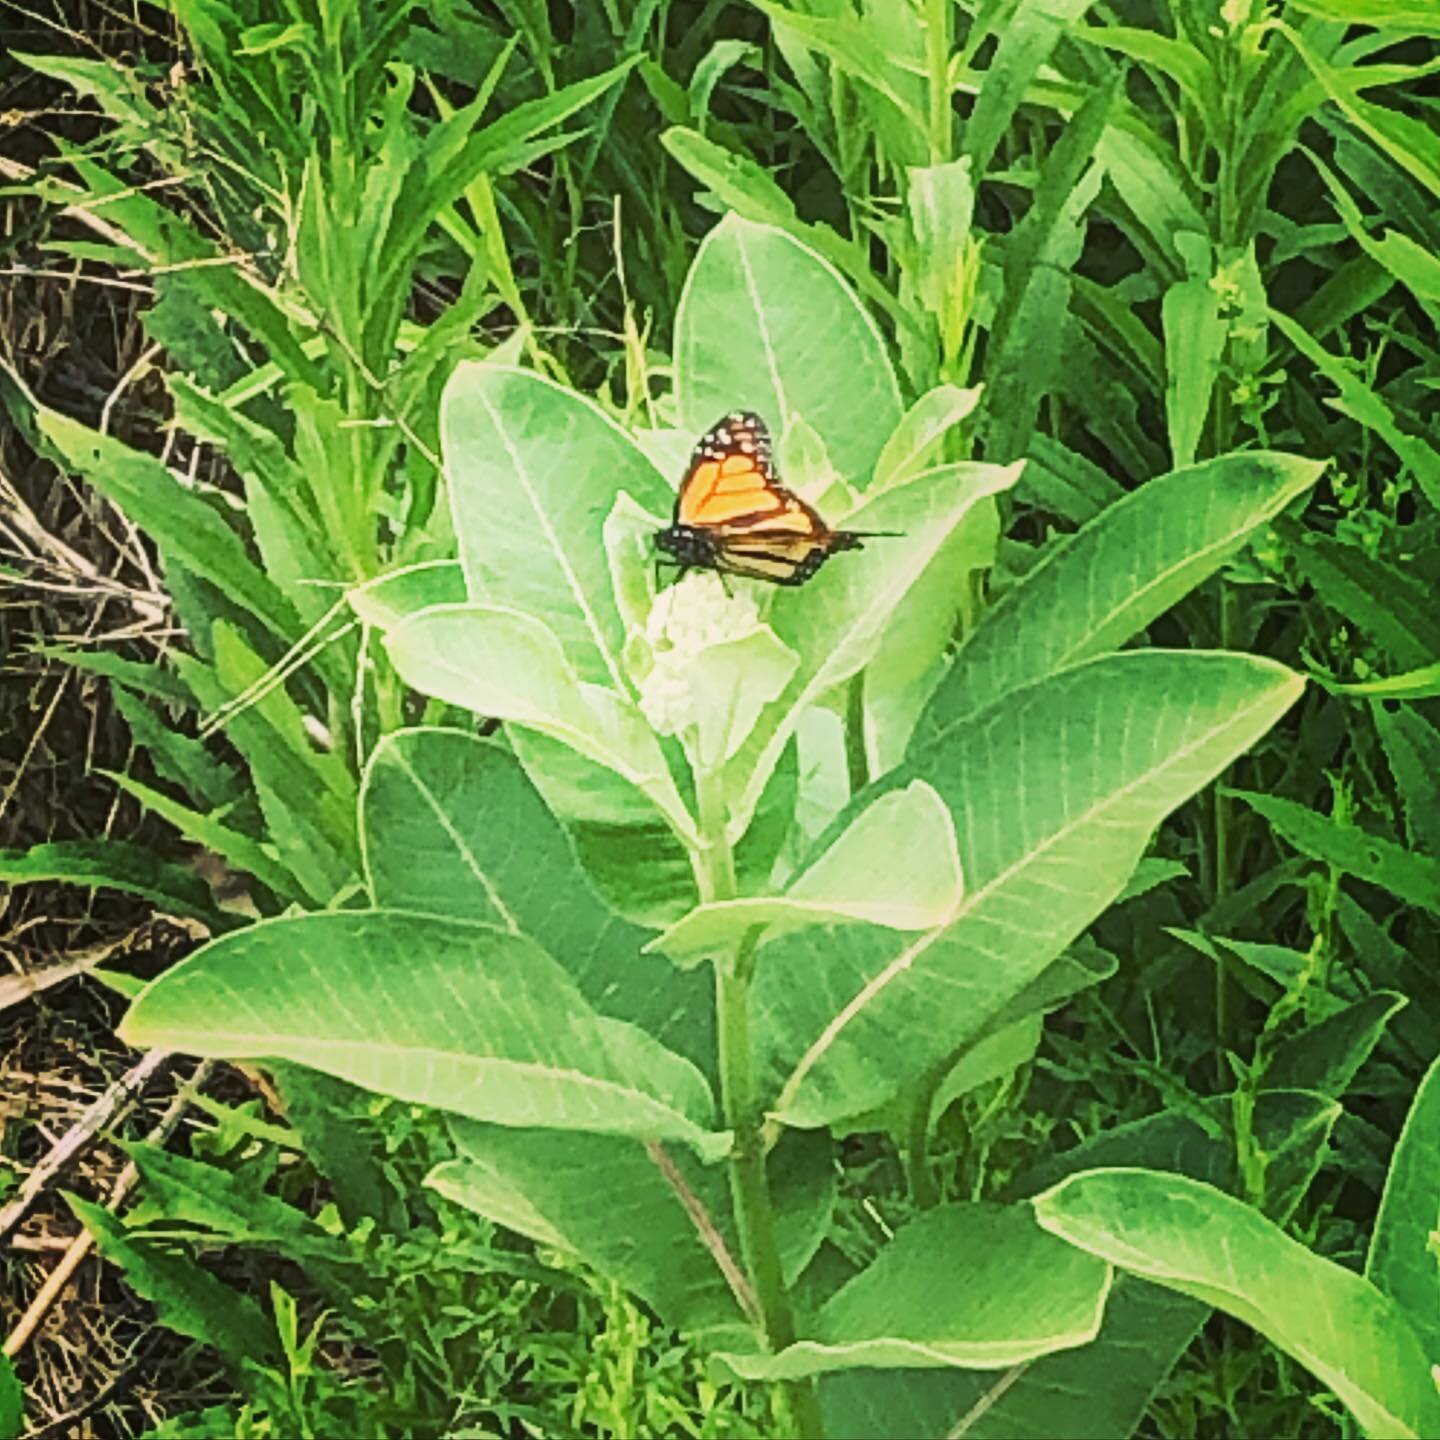 First monarch sighting of the year!

Their arrival into the waterways of the Rideau canal times up with the blooming of the milkweed. Common milkweed (Asclepias syriaca) seen here

Glad to see that they&rsquo;re here and doing well 👌